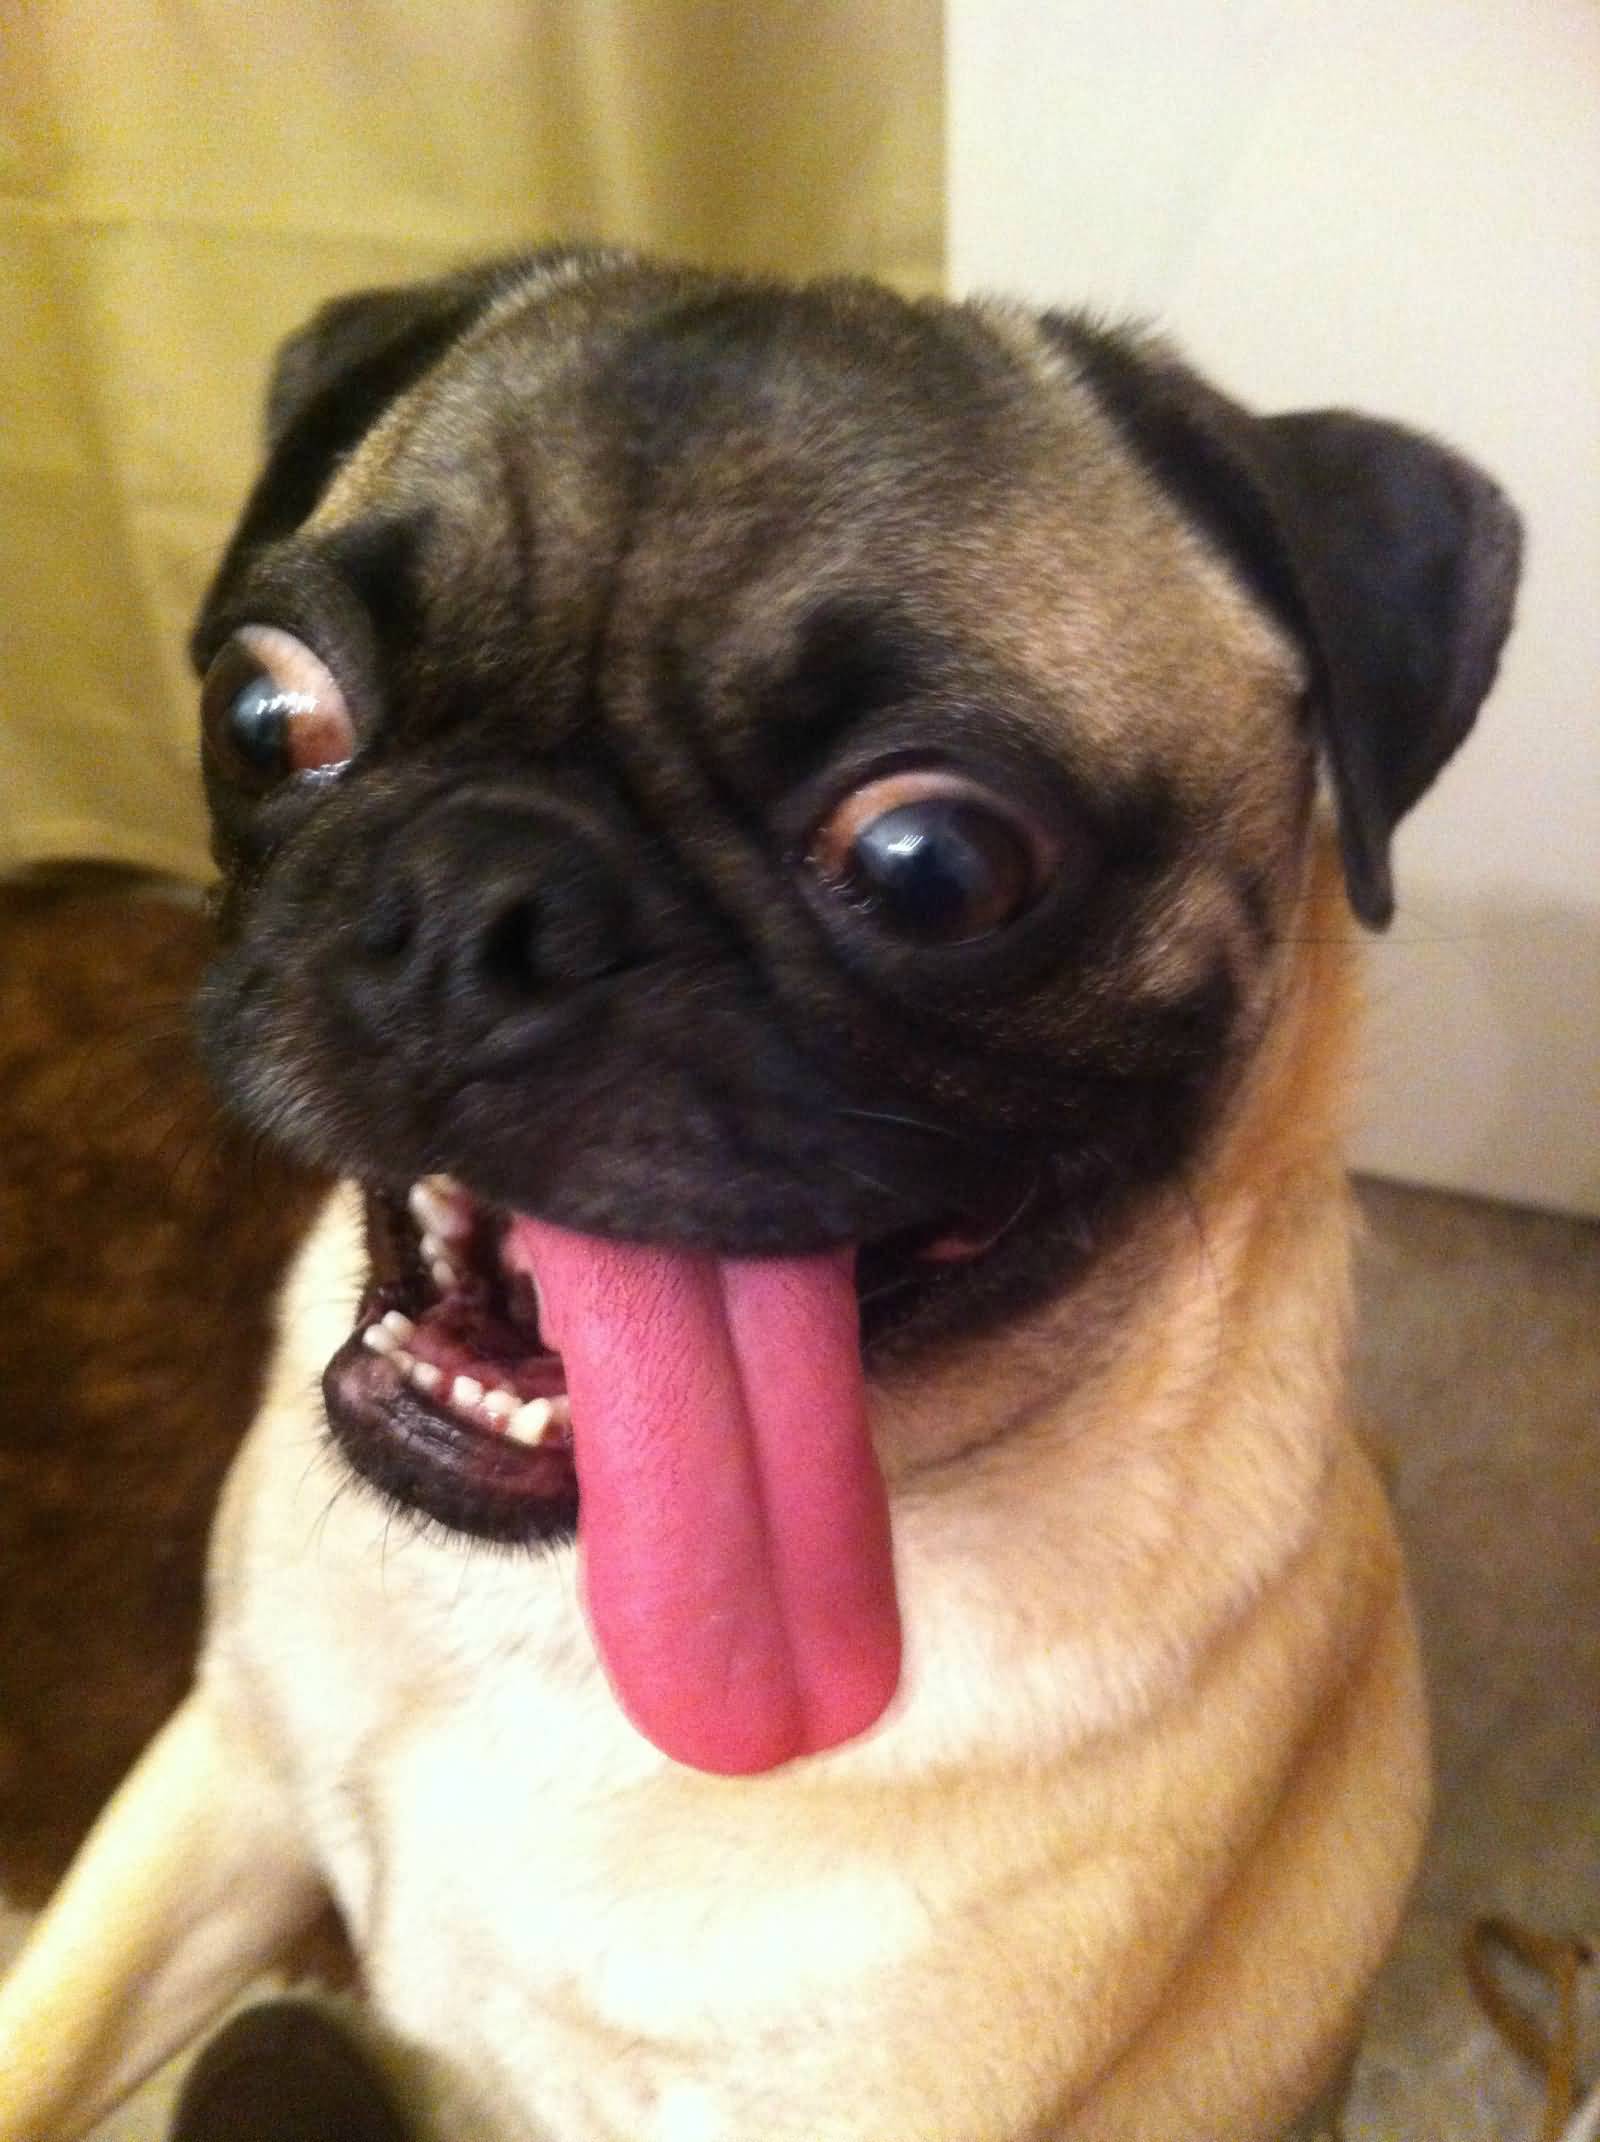 Funny Pug Dog With Tongue Out